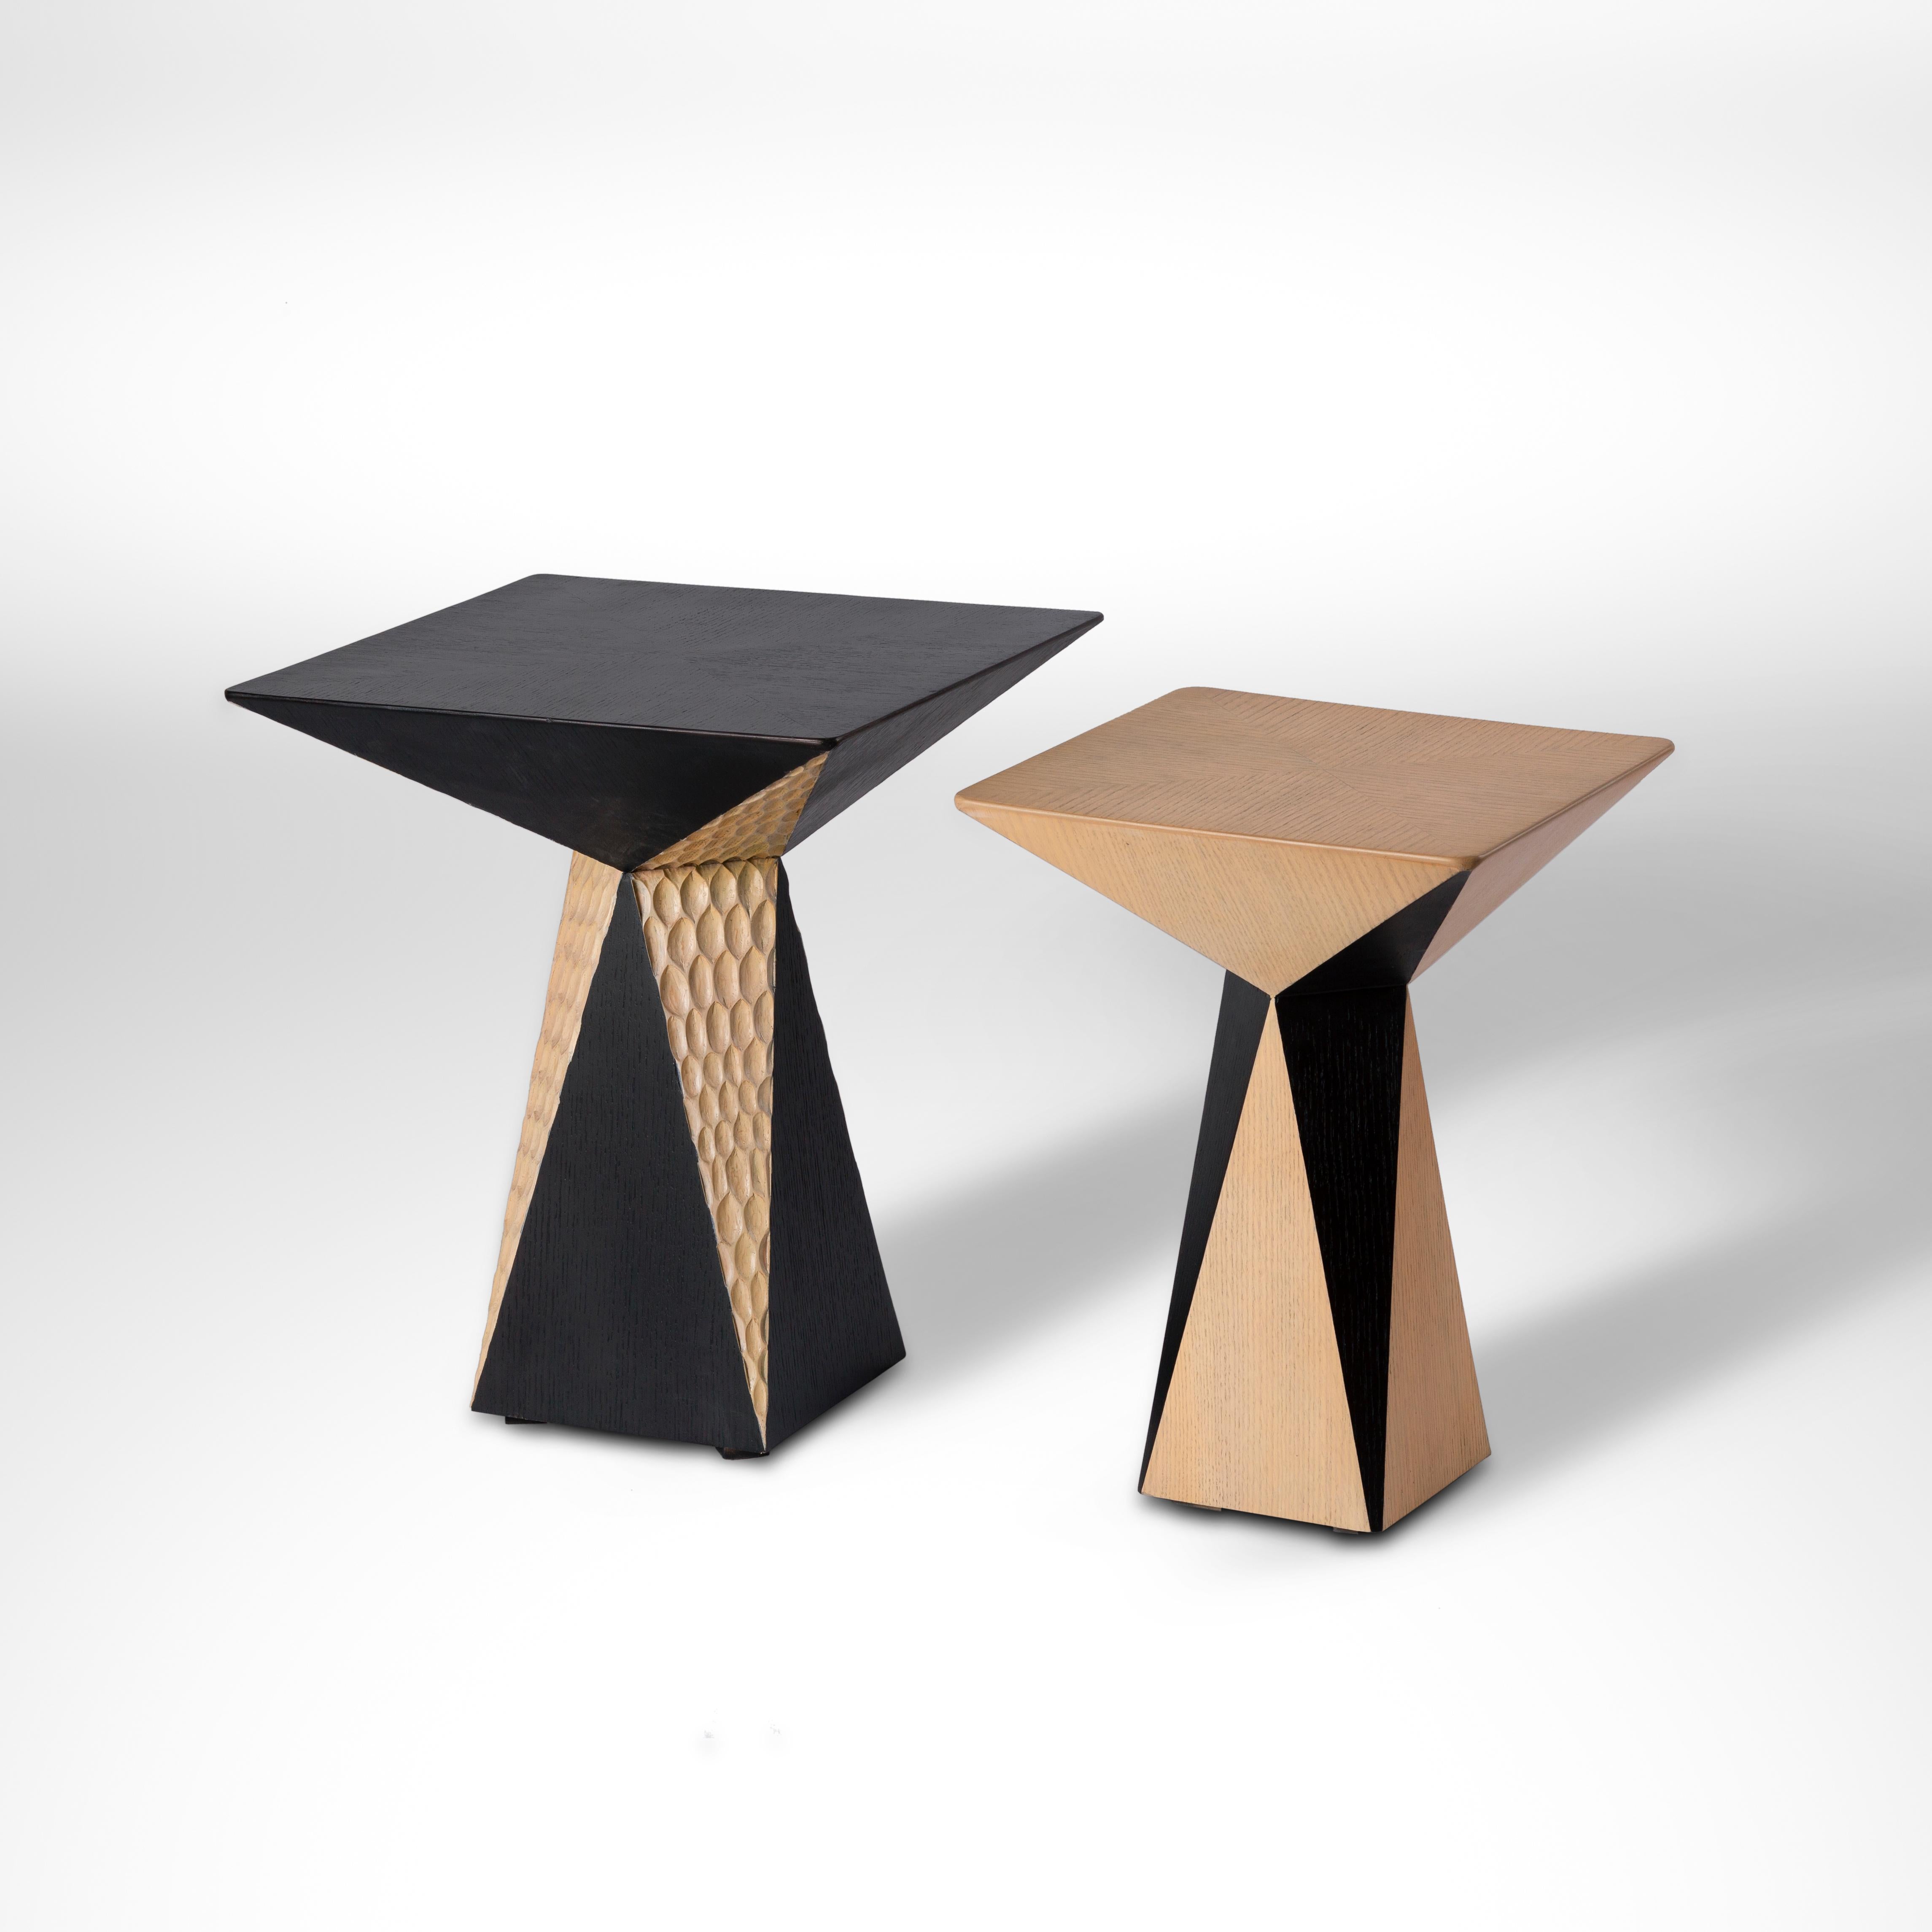 Hand carved oak side table inspired by Crystal Formations of the Oases in Egypt.
Our edgy CRYSTAL II accent table draws its silhouettes from the crystalline formations found near the Bahareya Oases. The contrasting lines and colors evoke the image